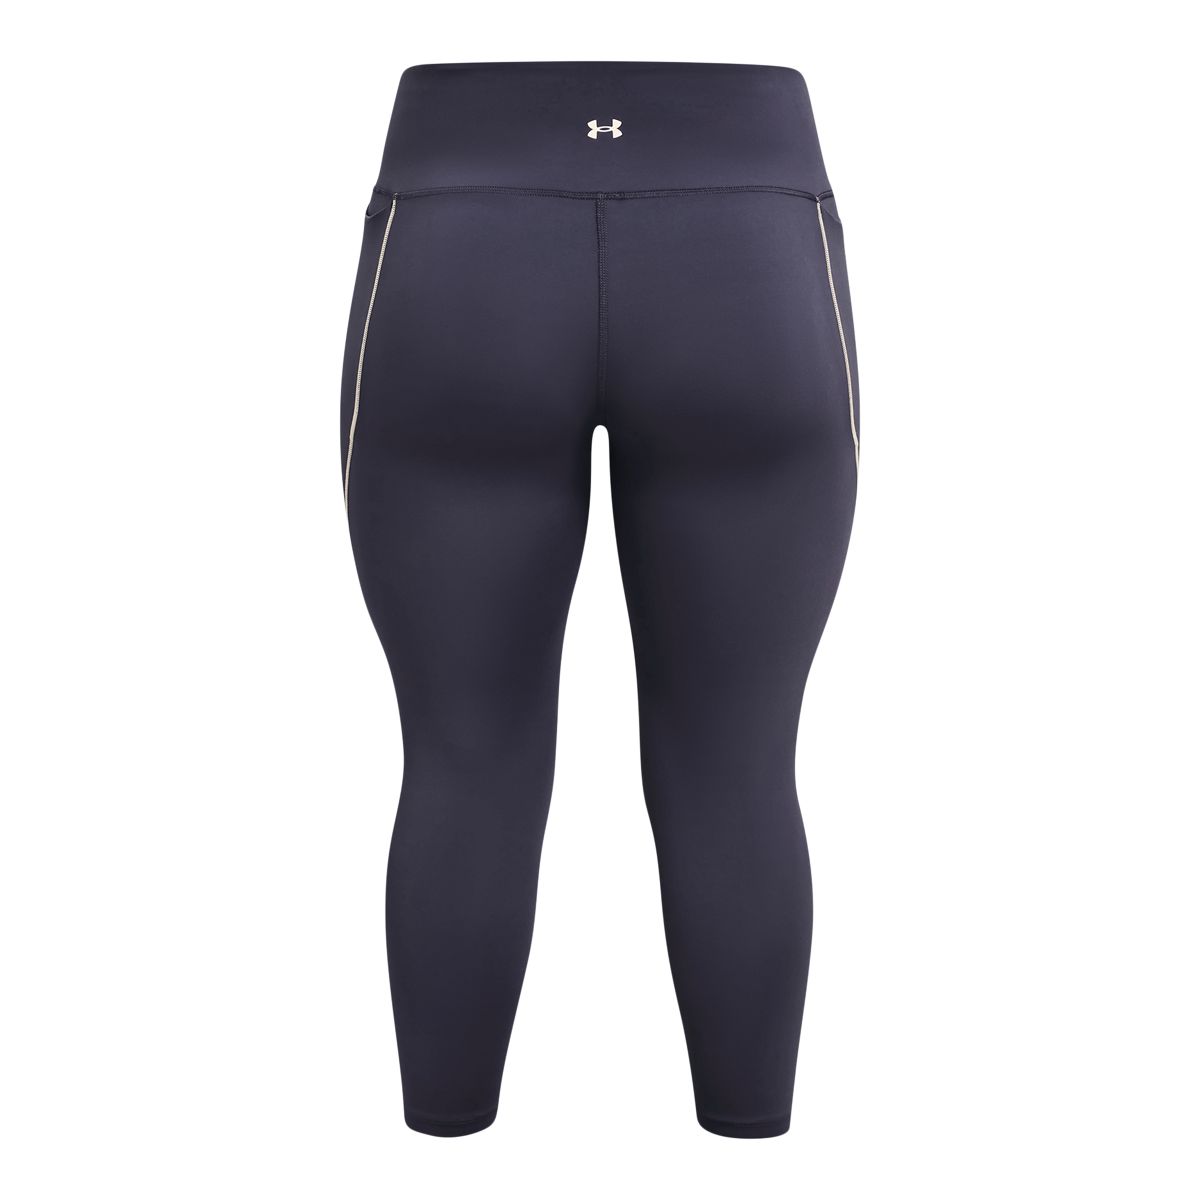 Under Armour Women's Plus Size Meridian Project Rock Ankle Tights